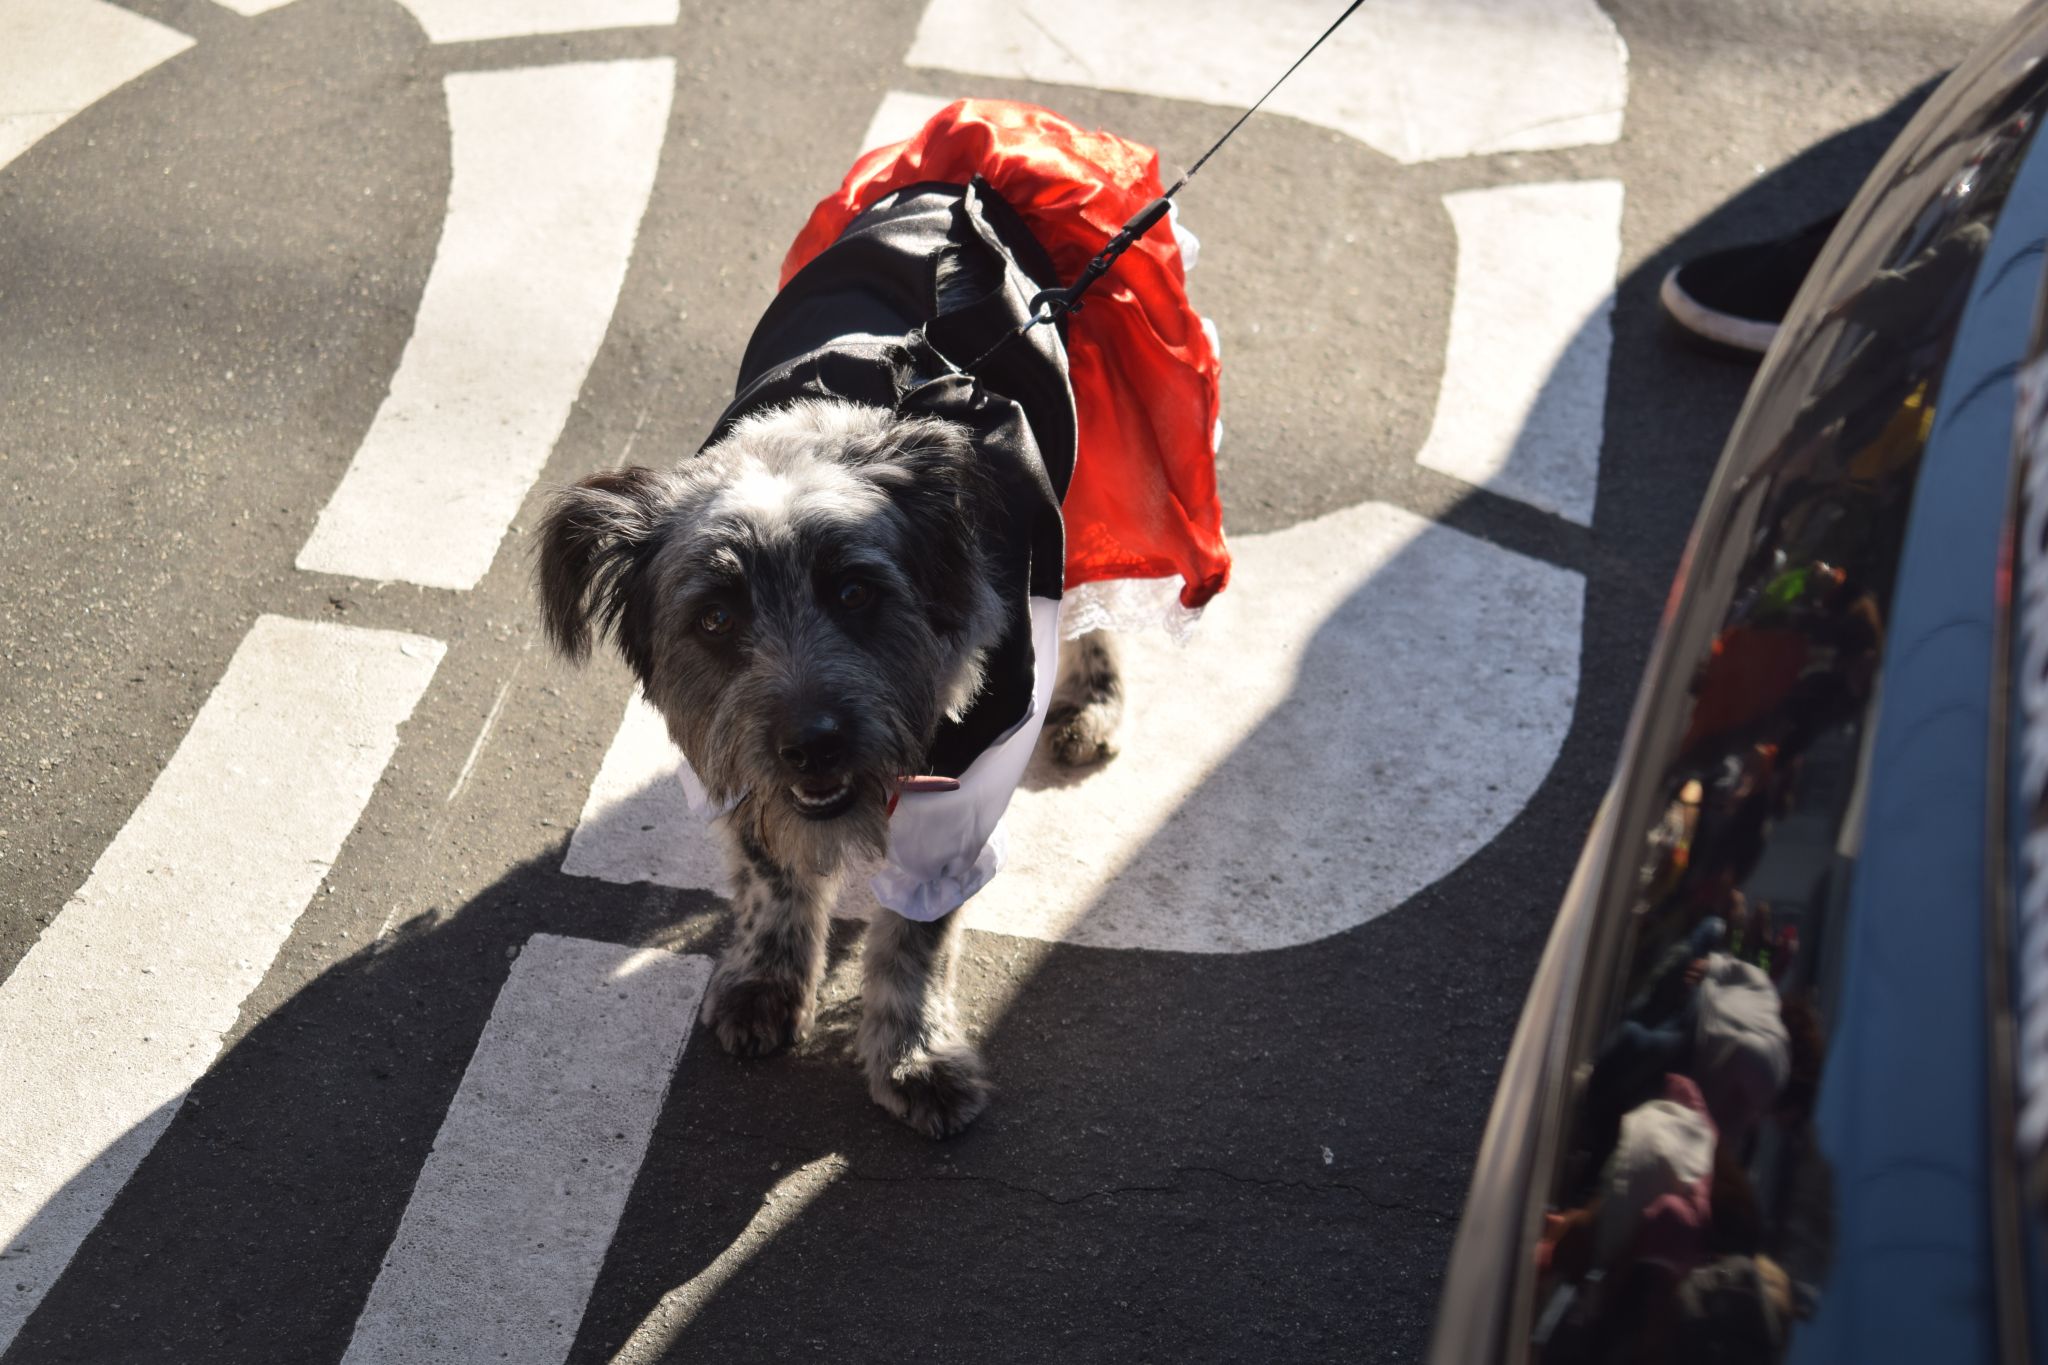 Cut4 on X: The @SFGiants held a dog costume contest, and ballpark